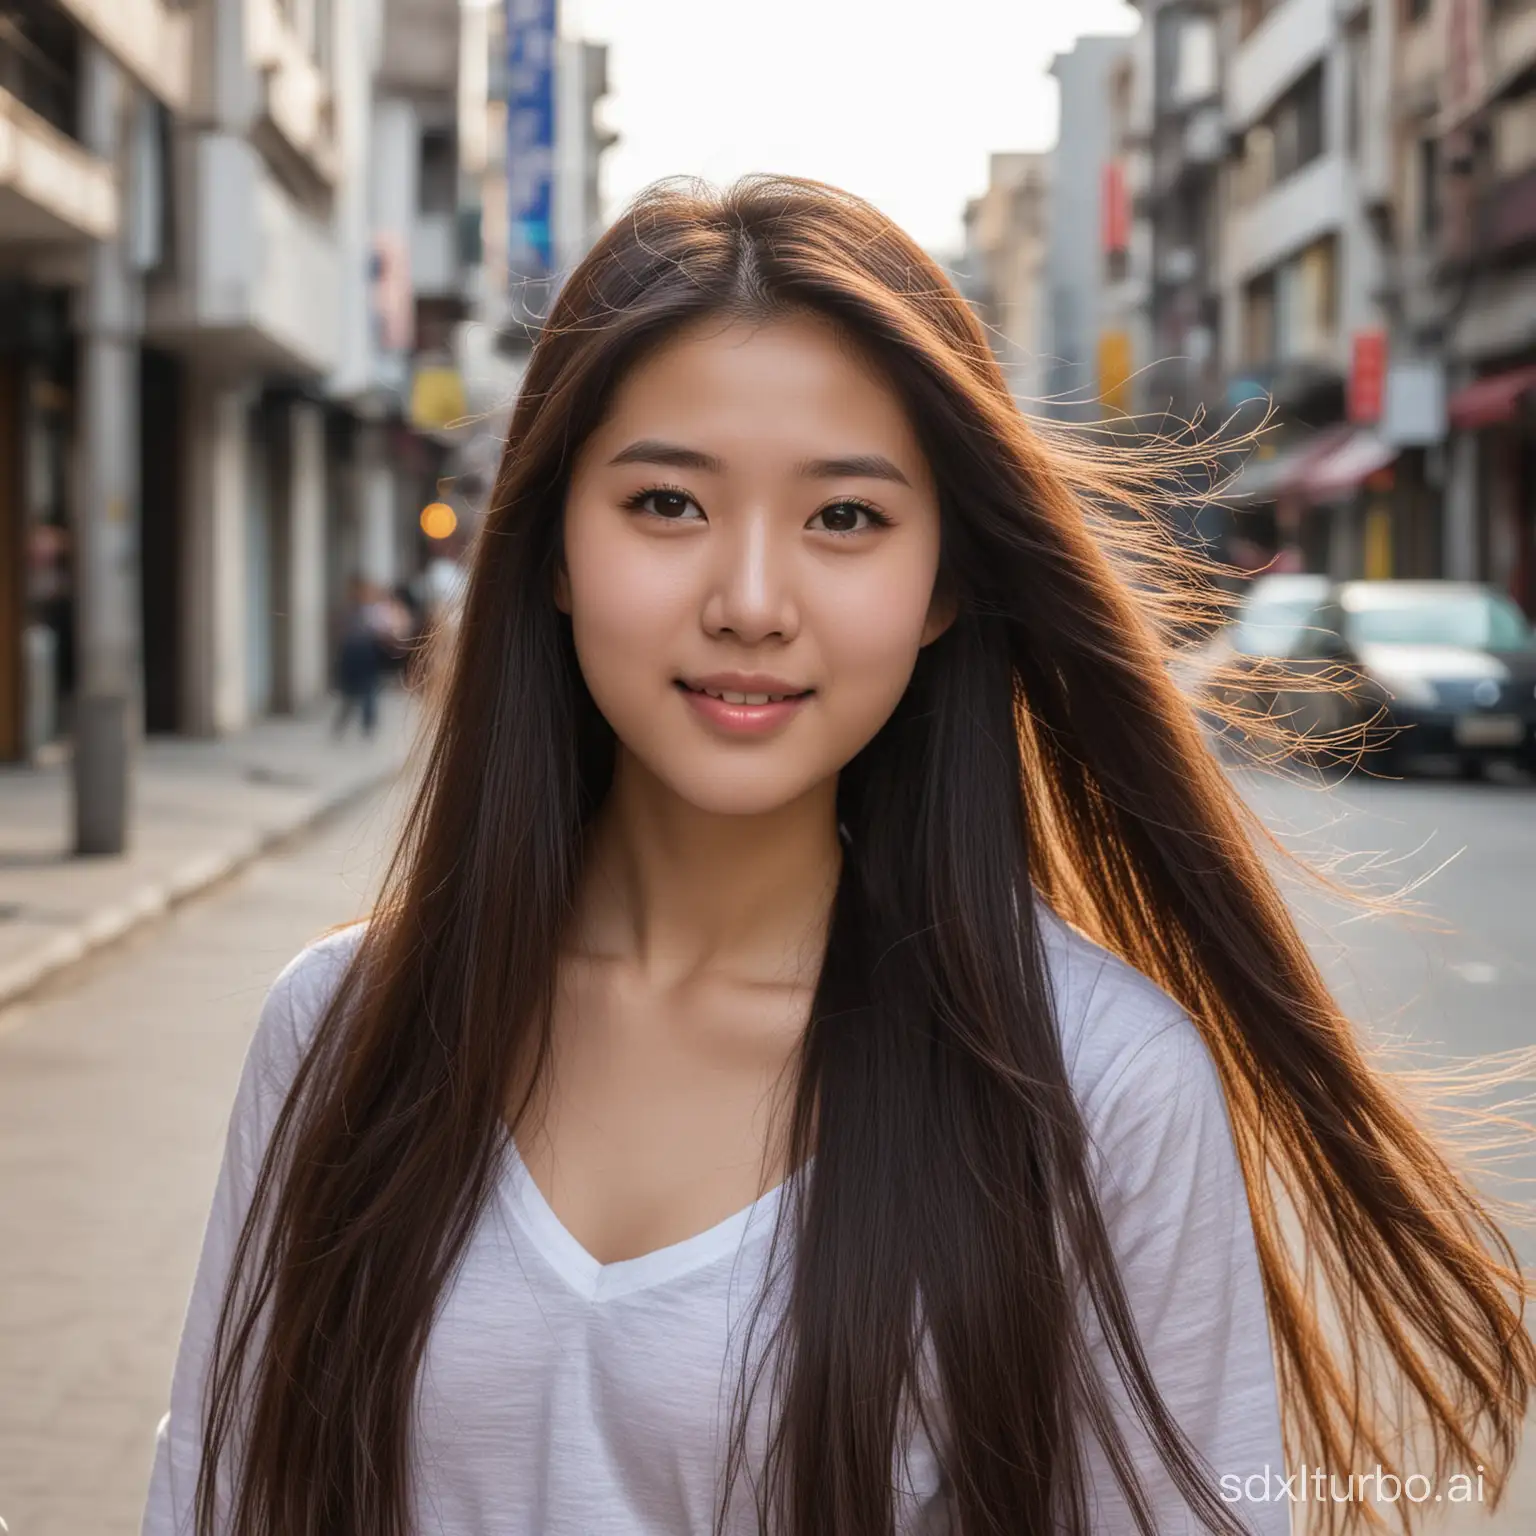 Chinese girl, 18 years old, plump, beautiful, with long flowing hair, standing on the street looking at the camera with affection, half-length shot